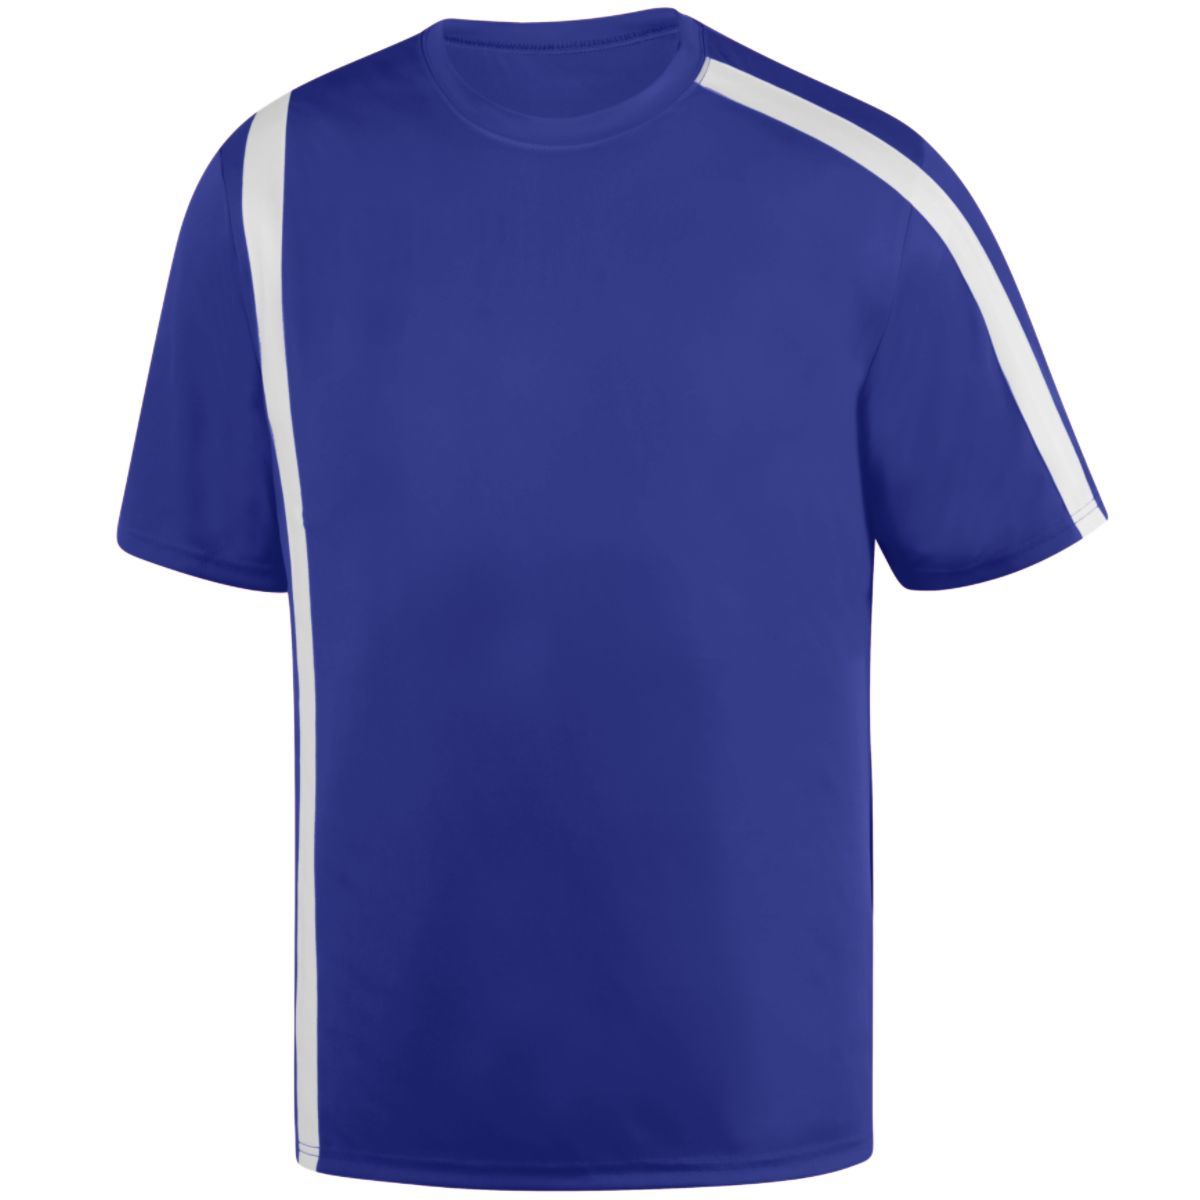 Augusta Sportswear Attacking Third Jersey in Purple/White  -Part of the Adult, Adult-Jersey, Augusta-Products, Soccer, Shirts, All-Sports-1 product lines at KanaleyCreations.com